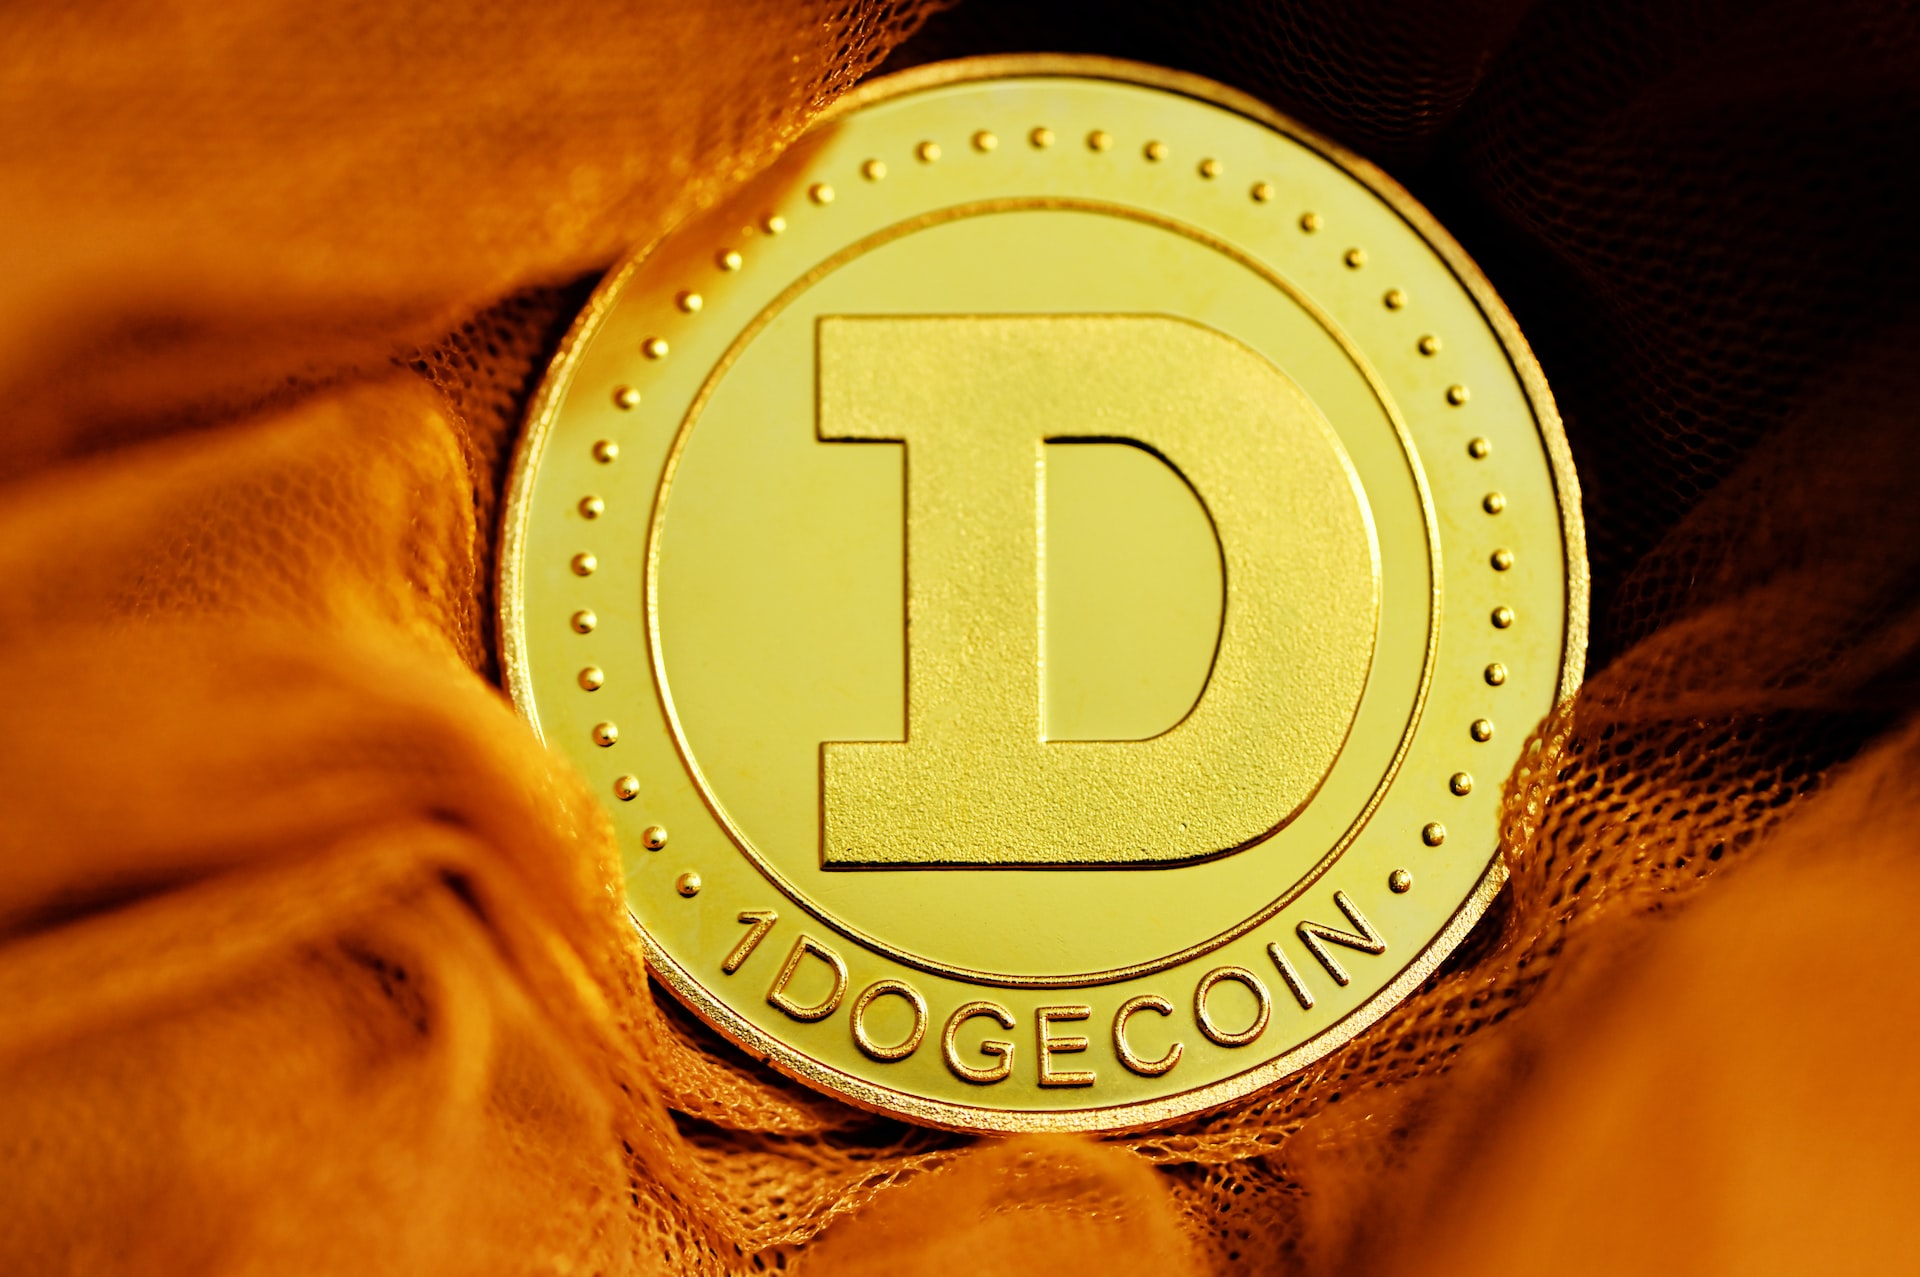 Dogecoin ($DOGE) to Become the Silver to Bitcoin’s Gold with X Payments Integration, Predicts Crypto Analyst Cole Garner